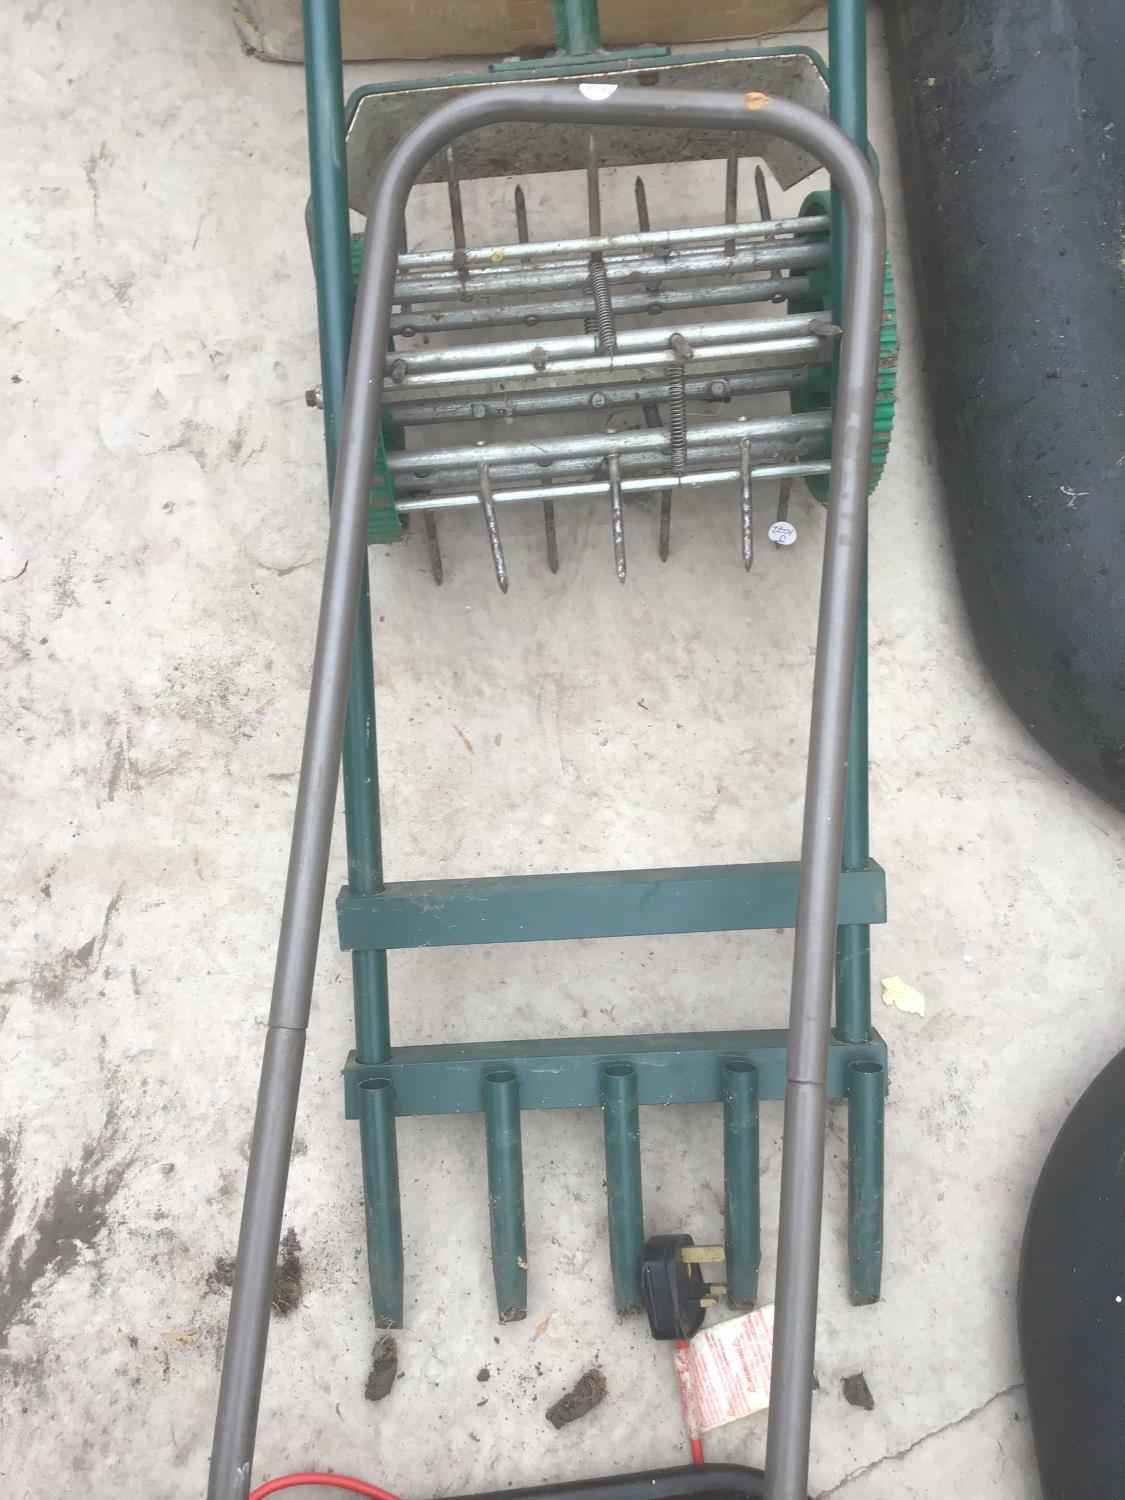 VARIOUS GARDEN TOOLS TO INCLUDE A LAWNRAKER 32, AN EVERGREEN FERTILIZER SPREADER AND TWO LAWN - Image 4 of 5